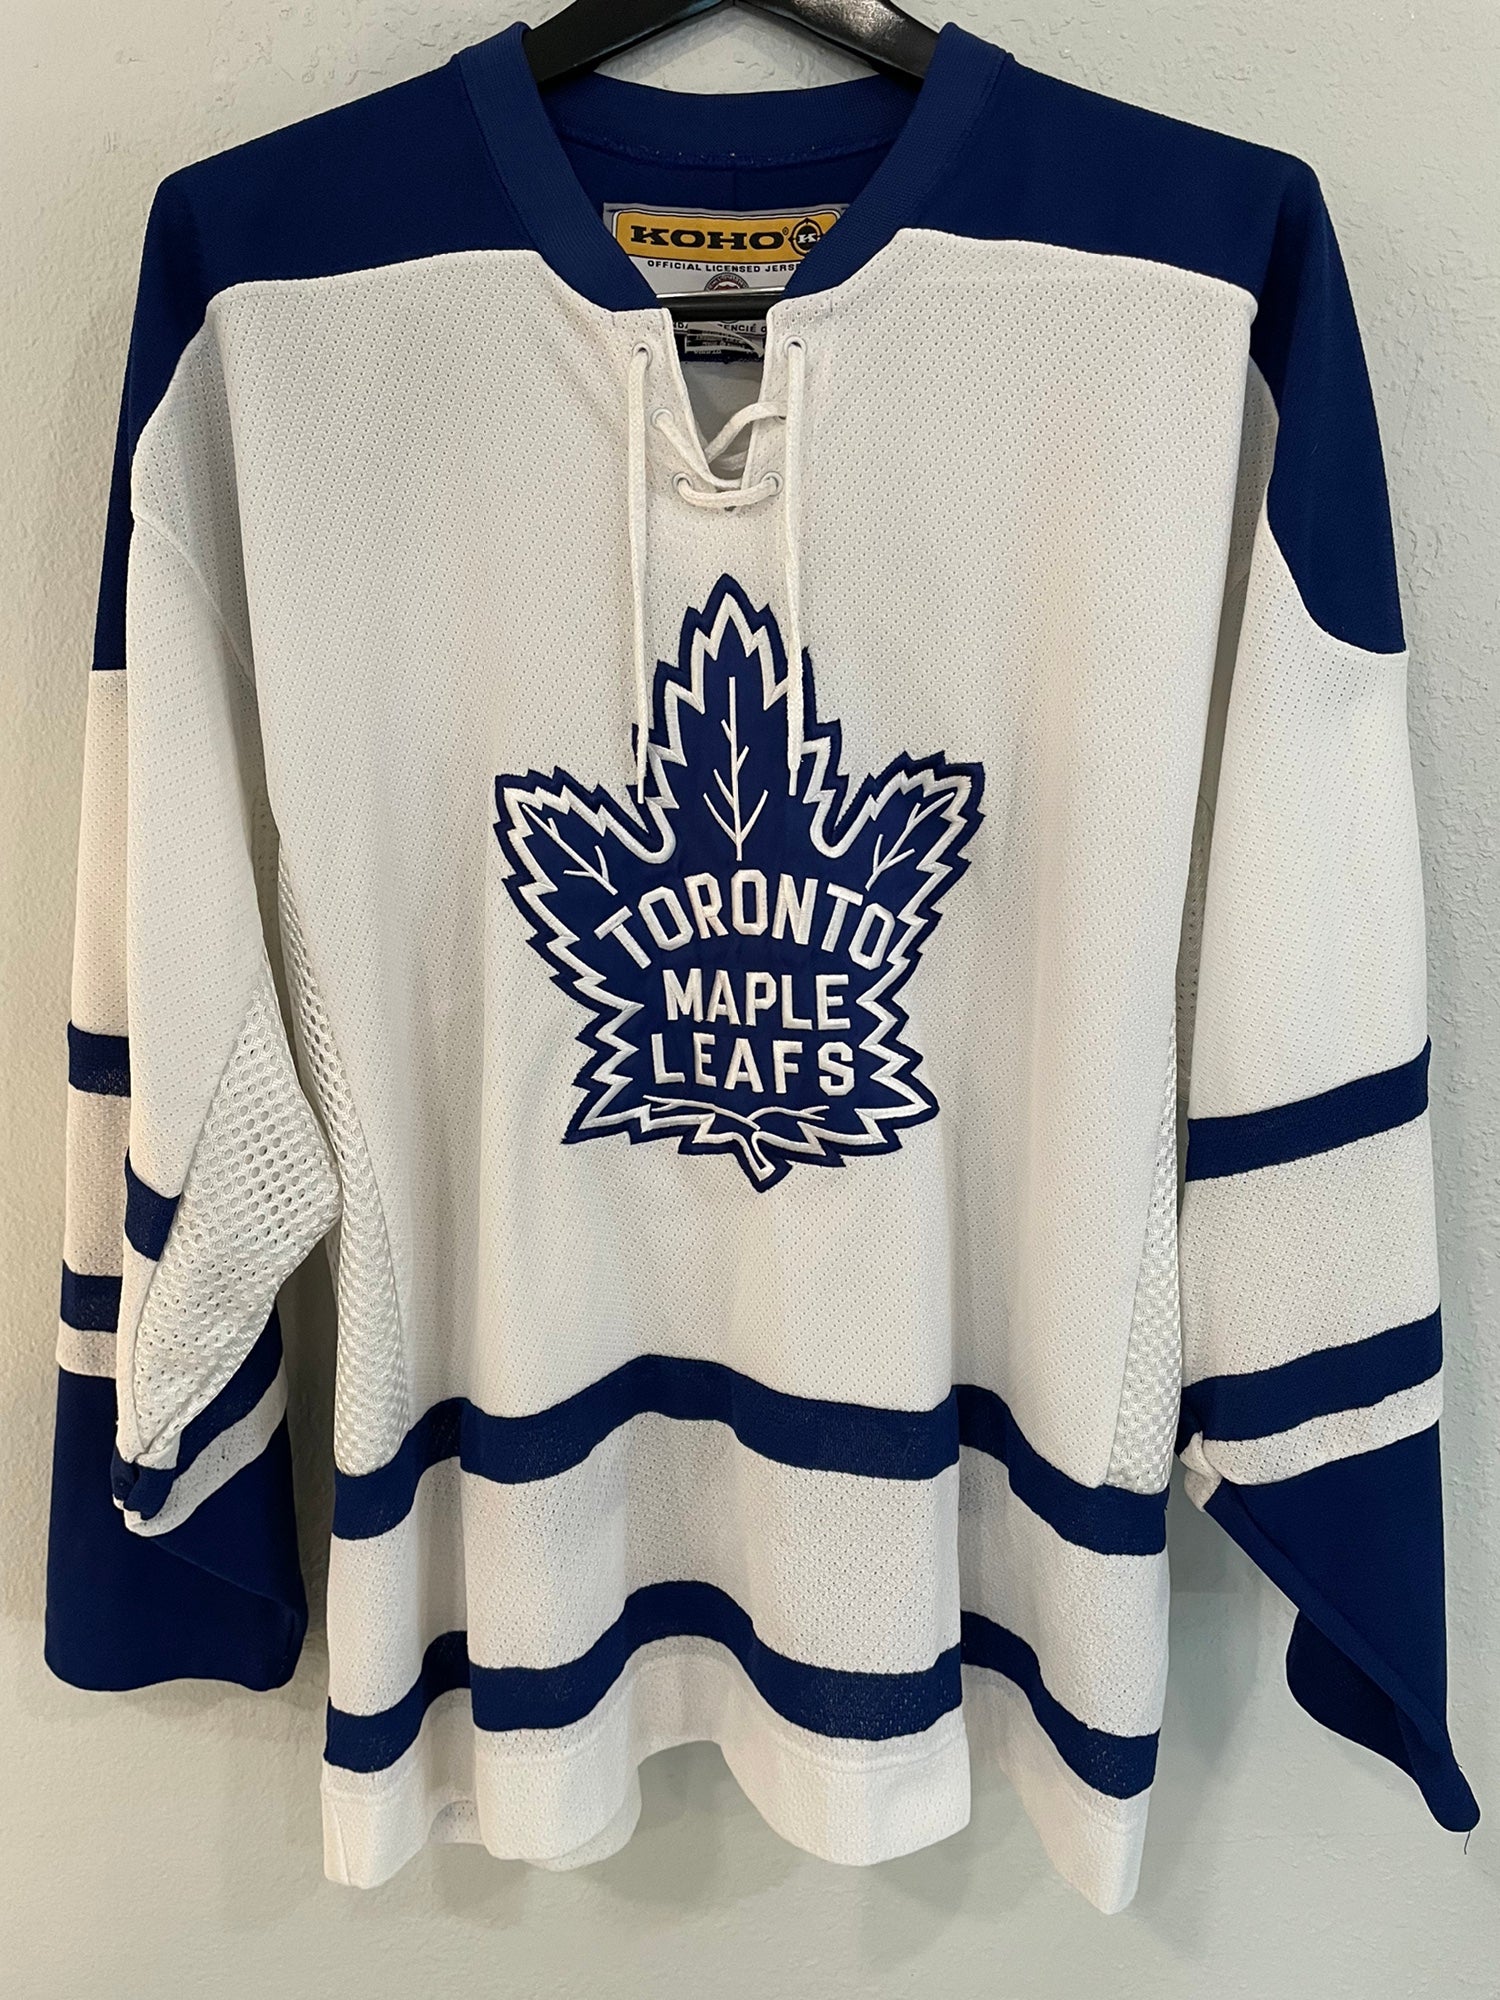 Athletic Knit - MLB VS NHL JERSEY SWAP Representing our Toronto